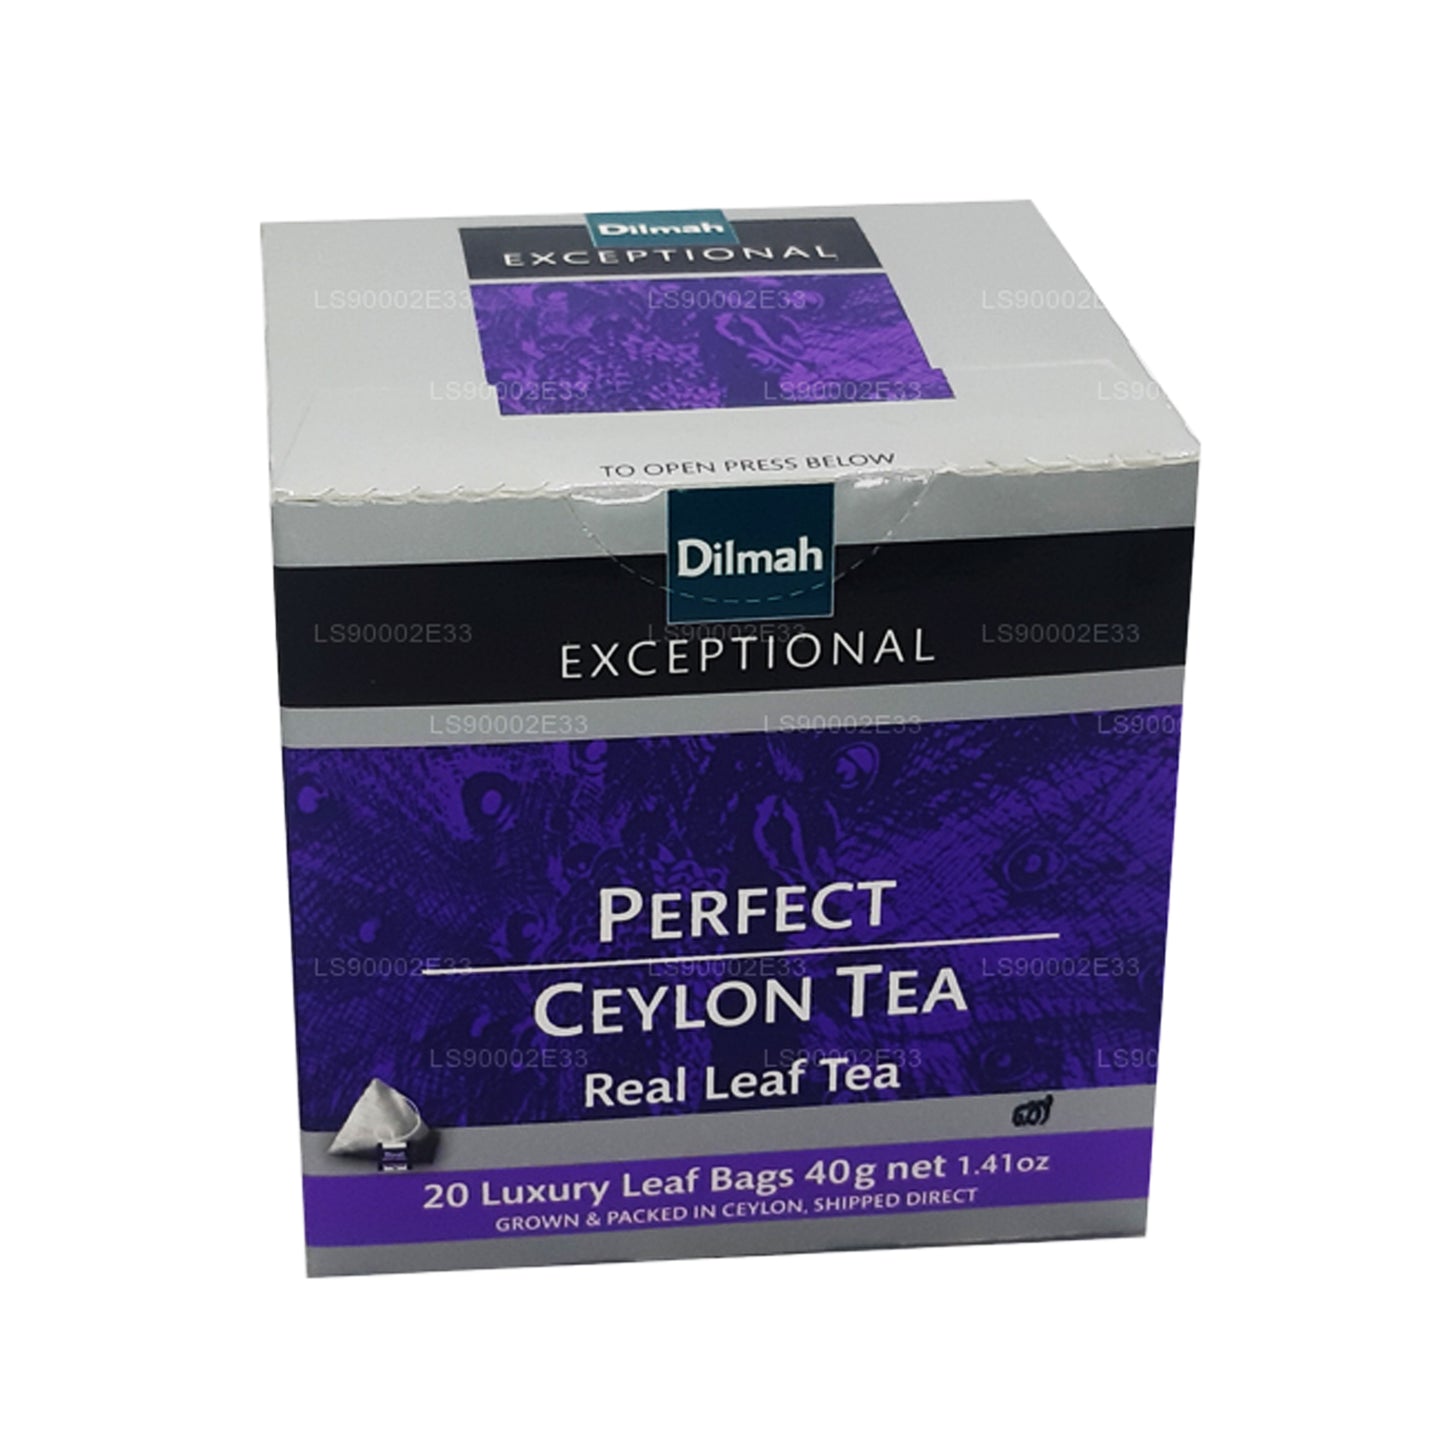 Dilmah Exceptional Perfect Ceylon Real Leaf Tea (40g) 20 Tag Bags